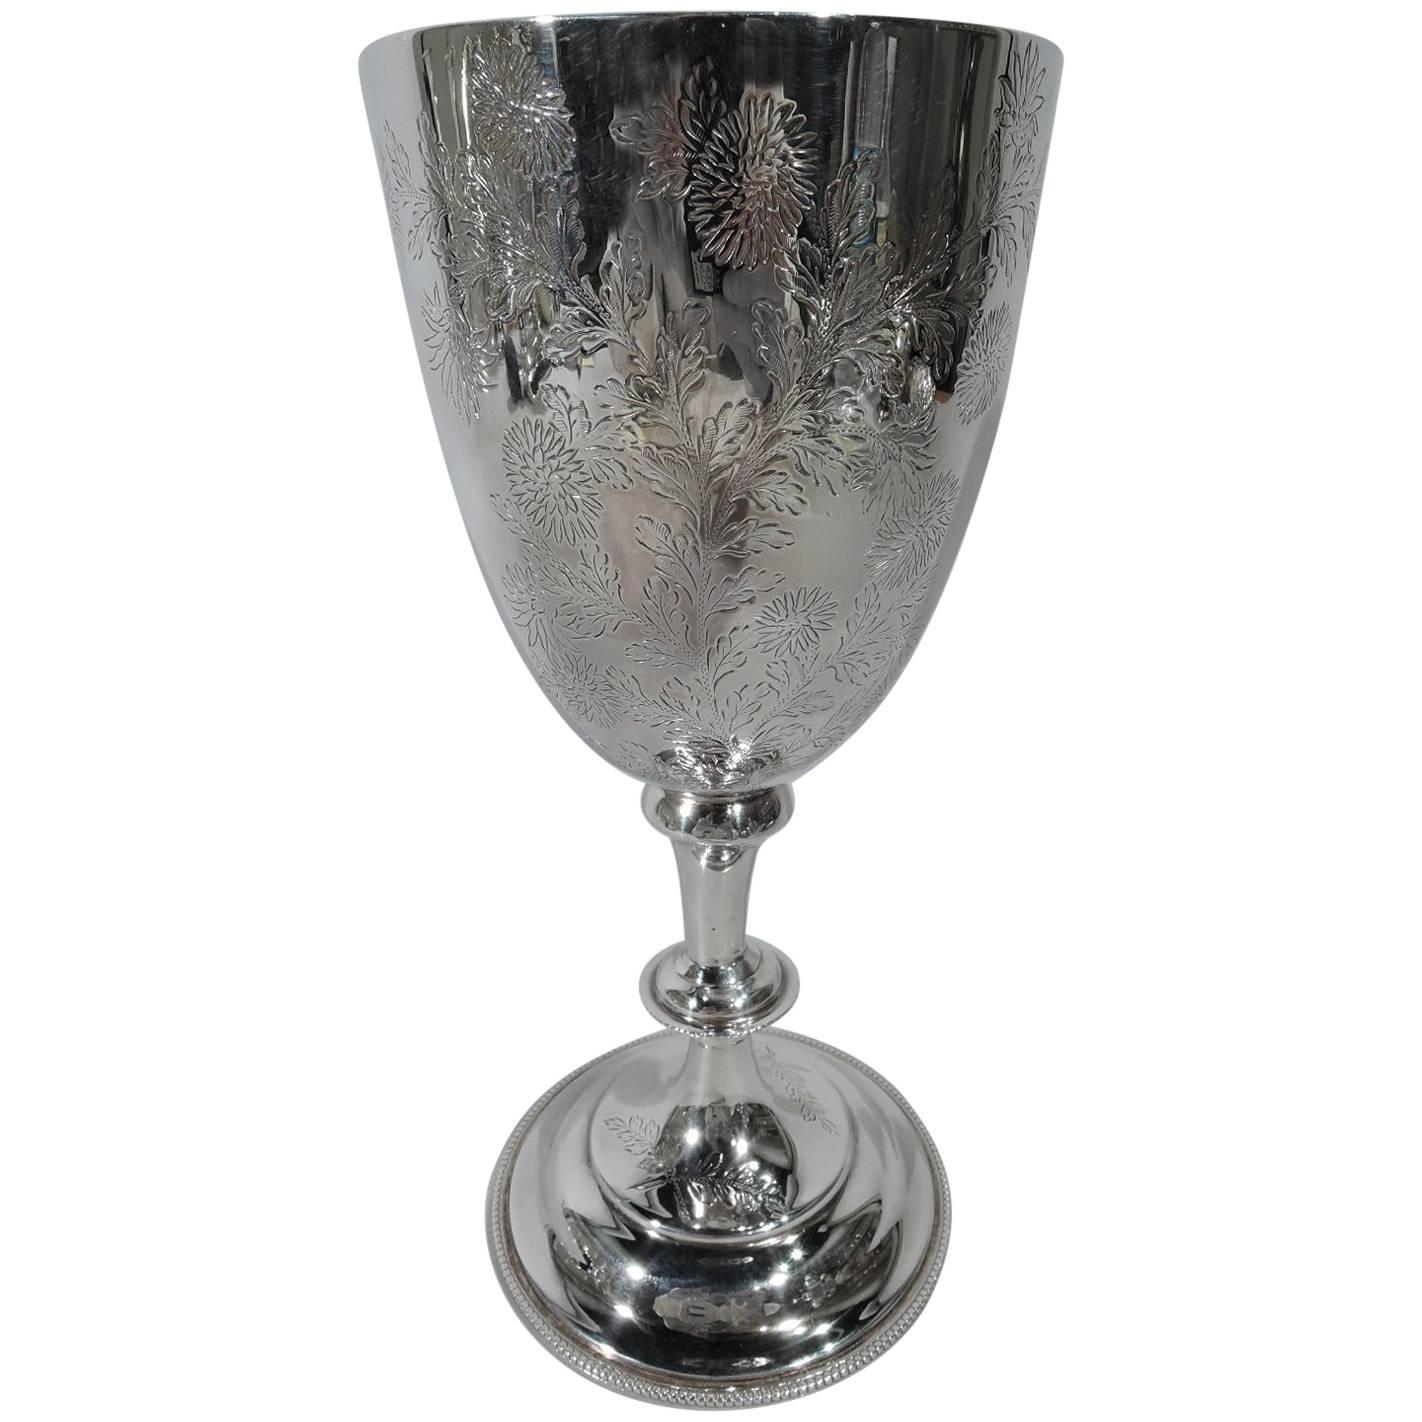 Tall Antique English Edwardian Sterling Silver Wildflower Goblet